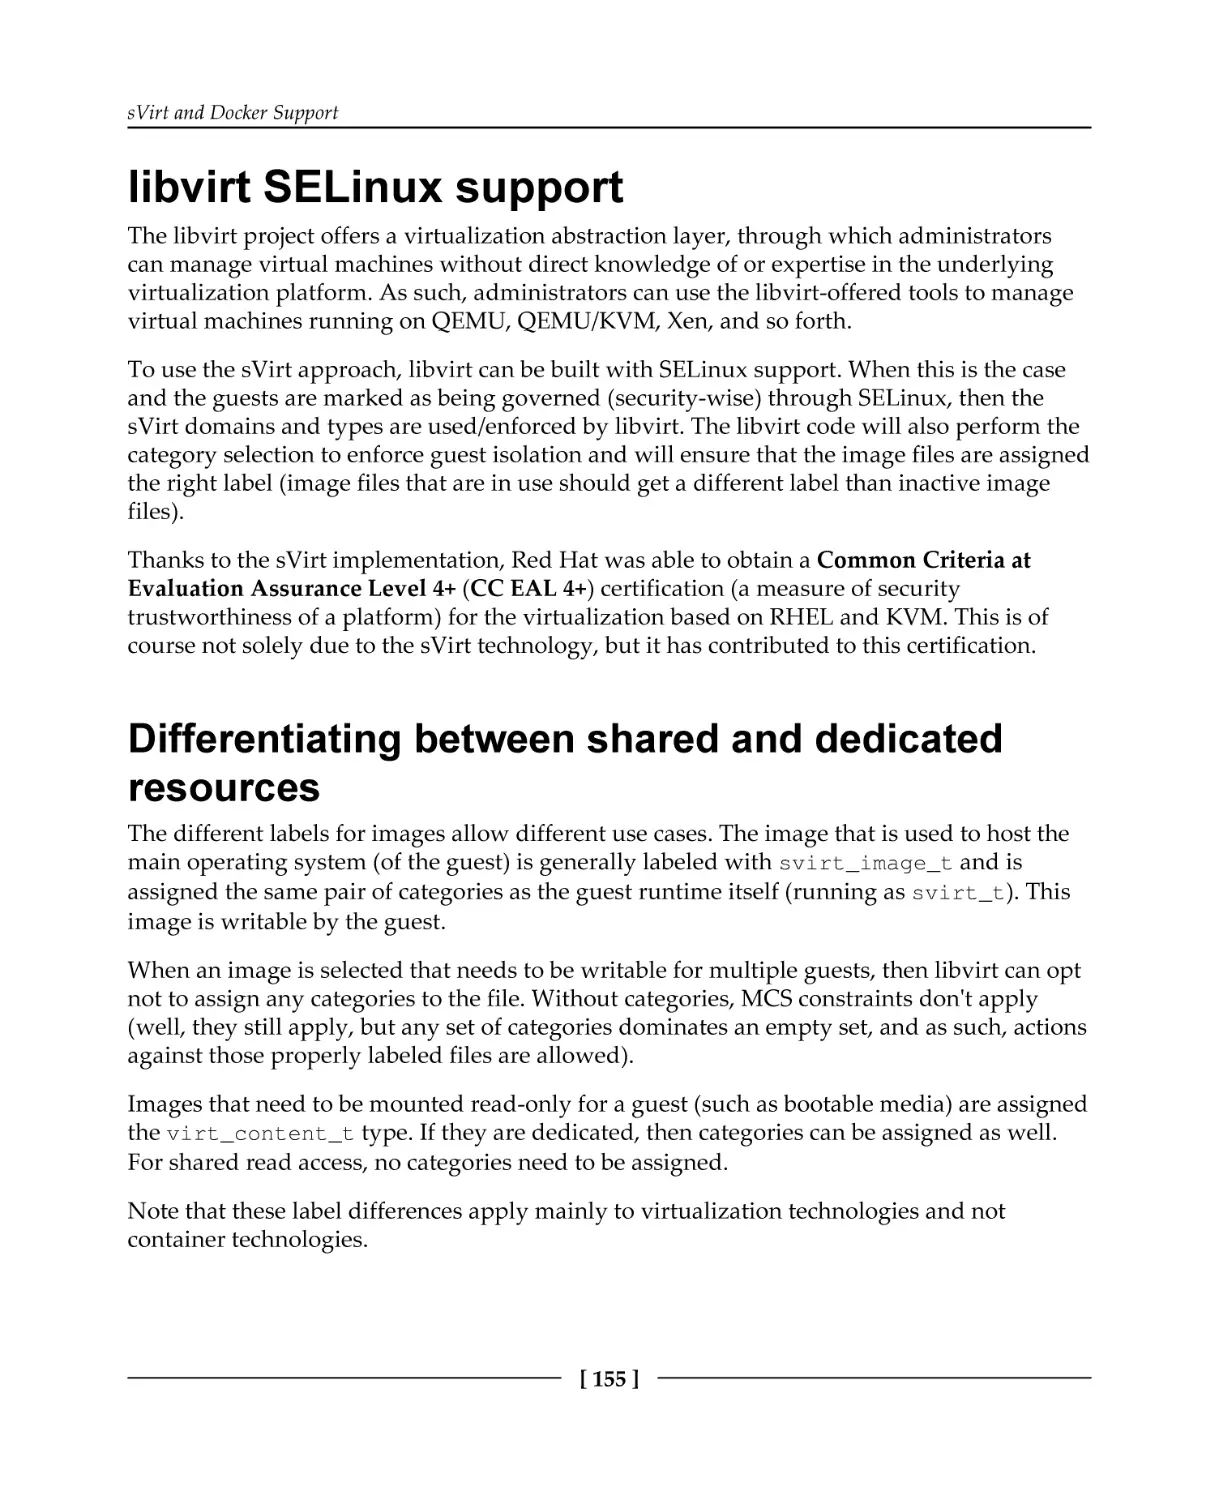 libvirt SELinux support
Differentiating between shared and dedicated resources